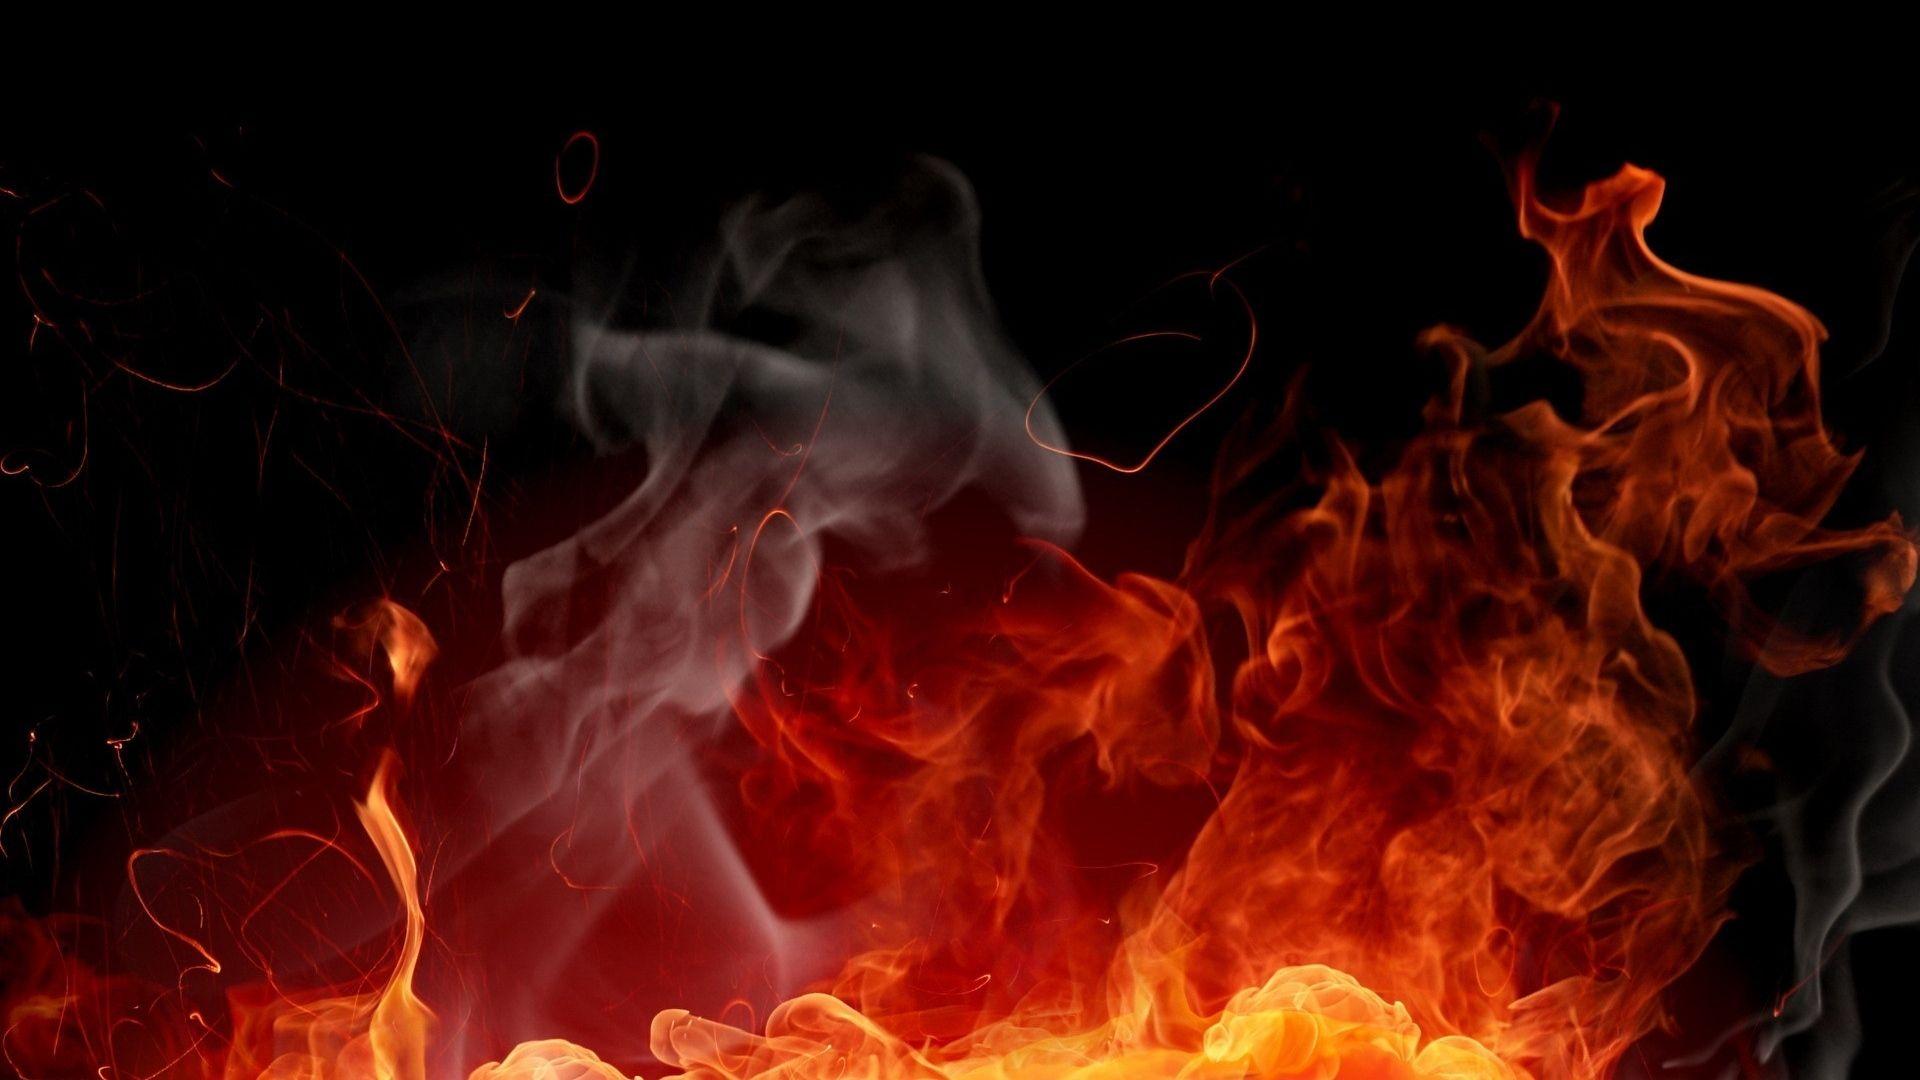 Download wallpaper 1920x1080 fire, background, color, abstraction